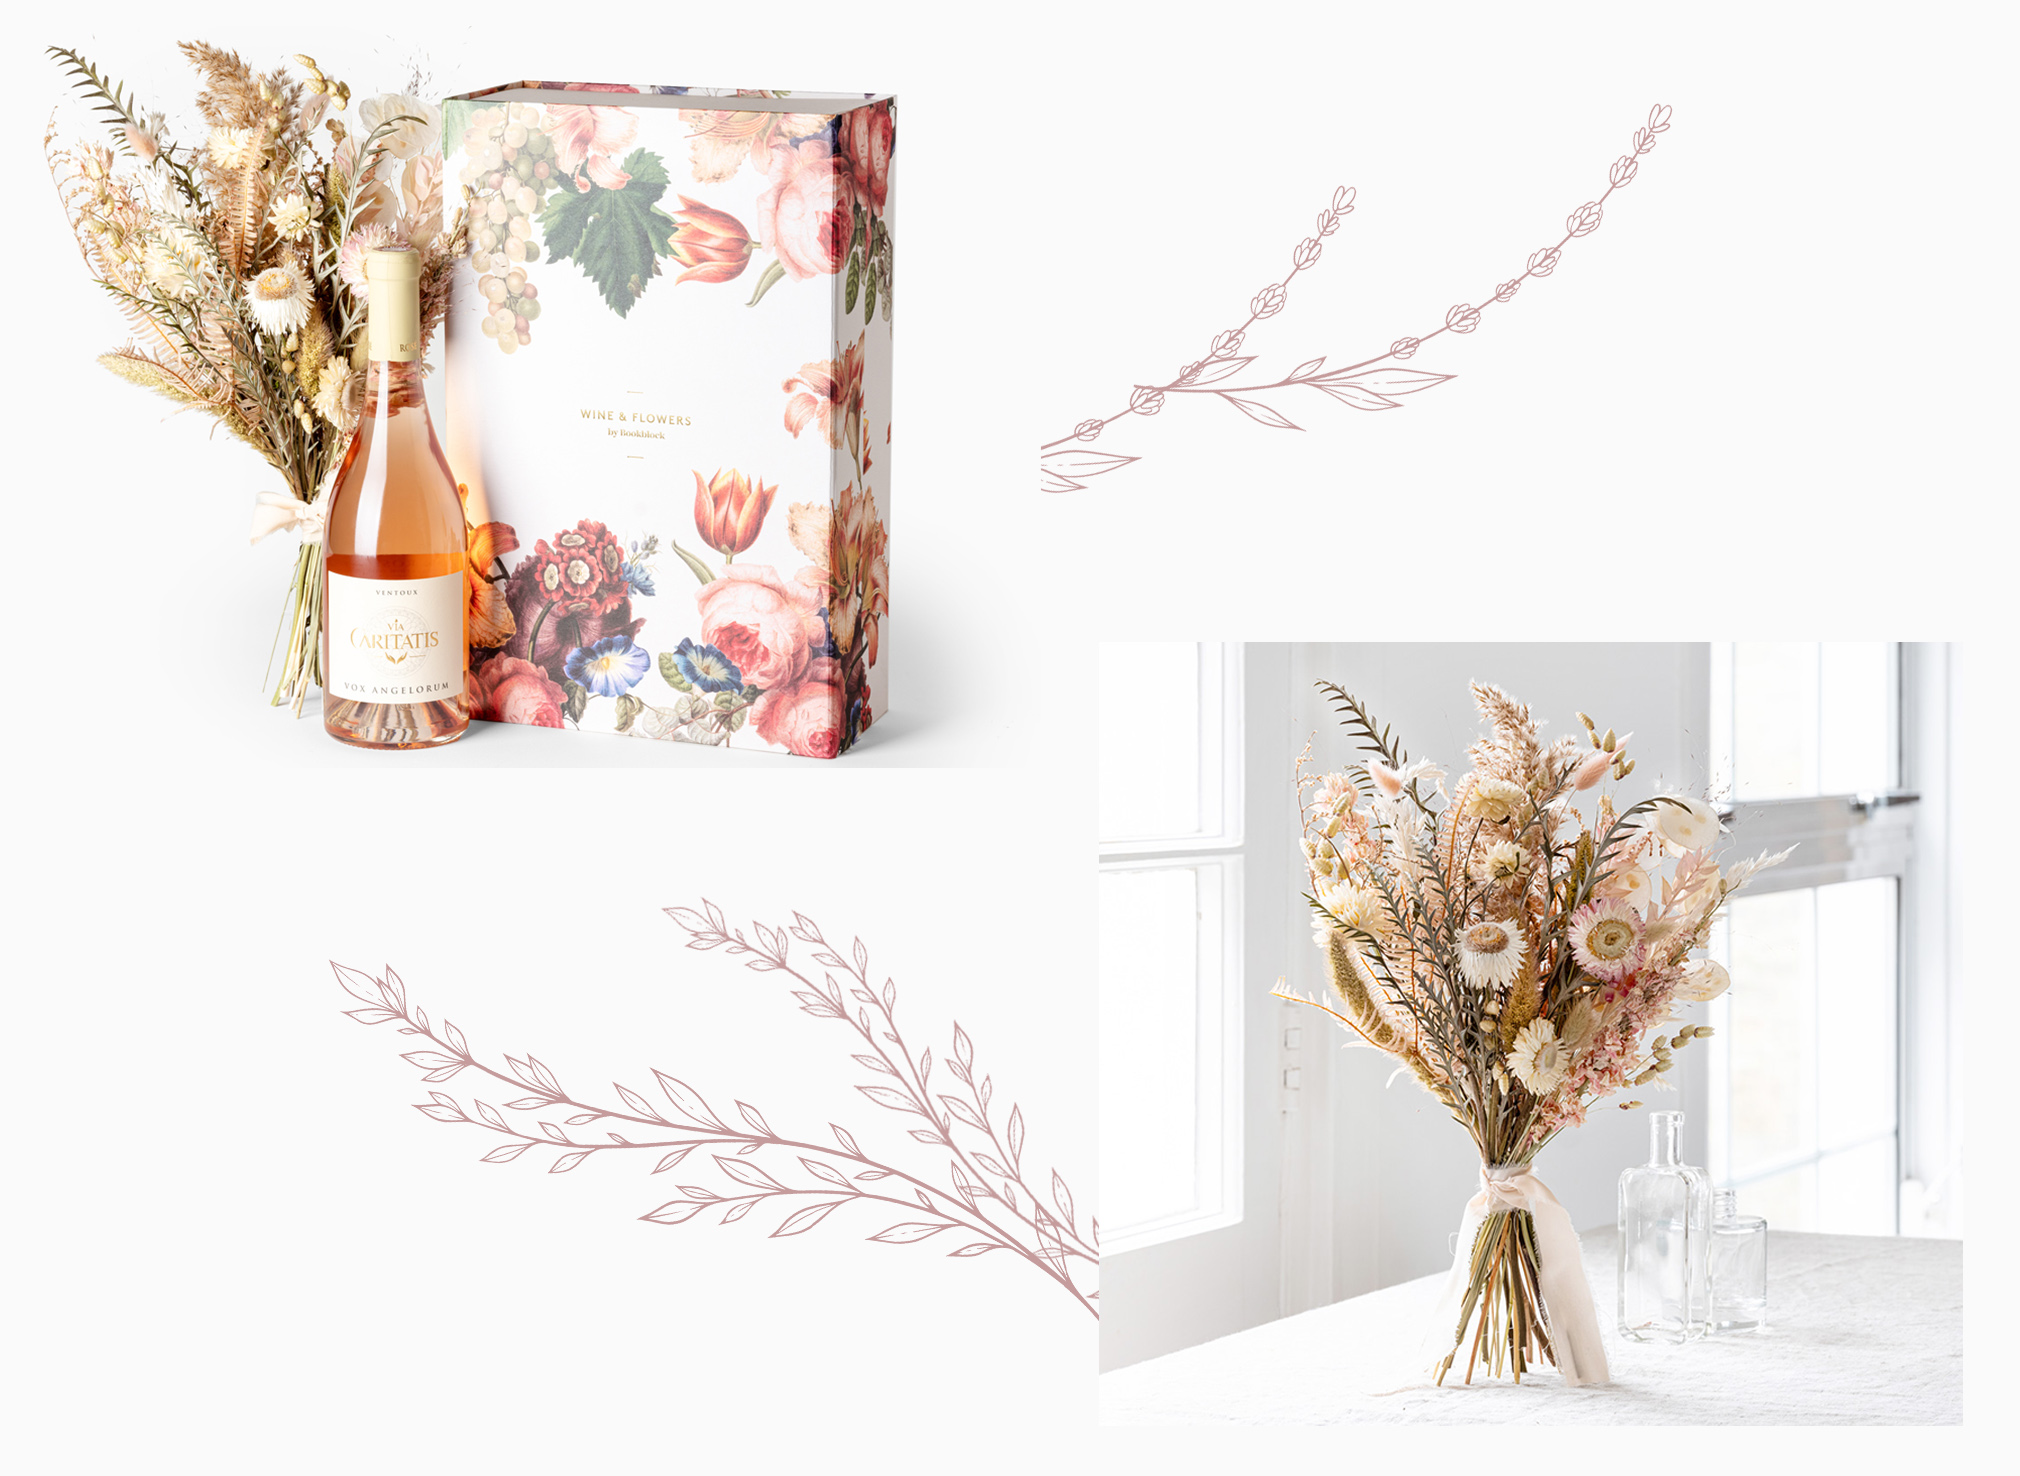 Posie and Angelorum ‘Wine & Flowers’ with leaf decoration in pink